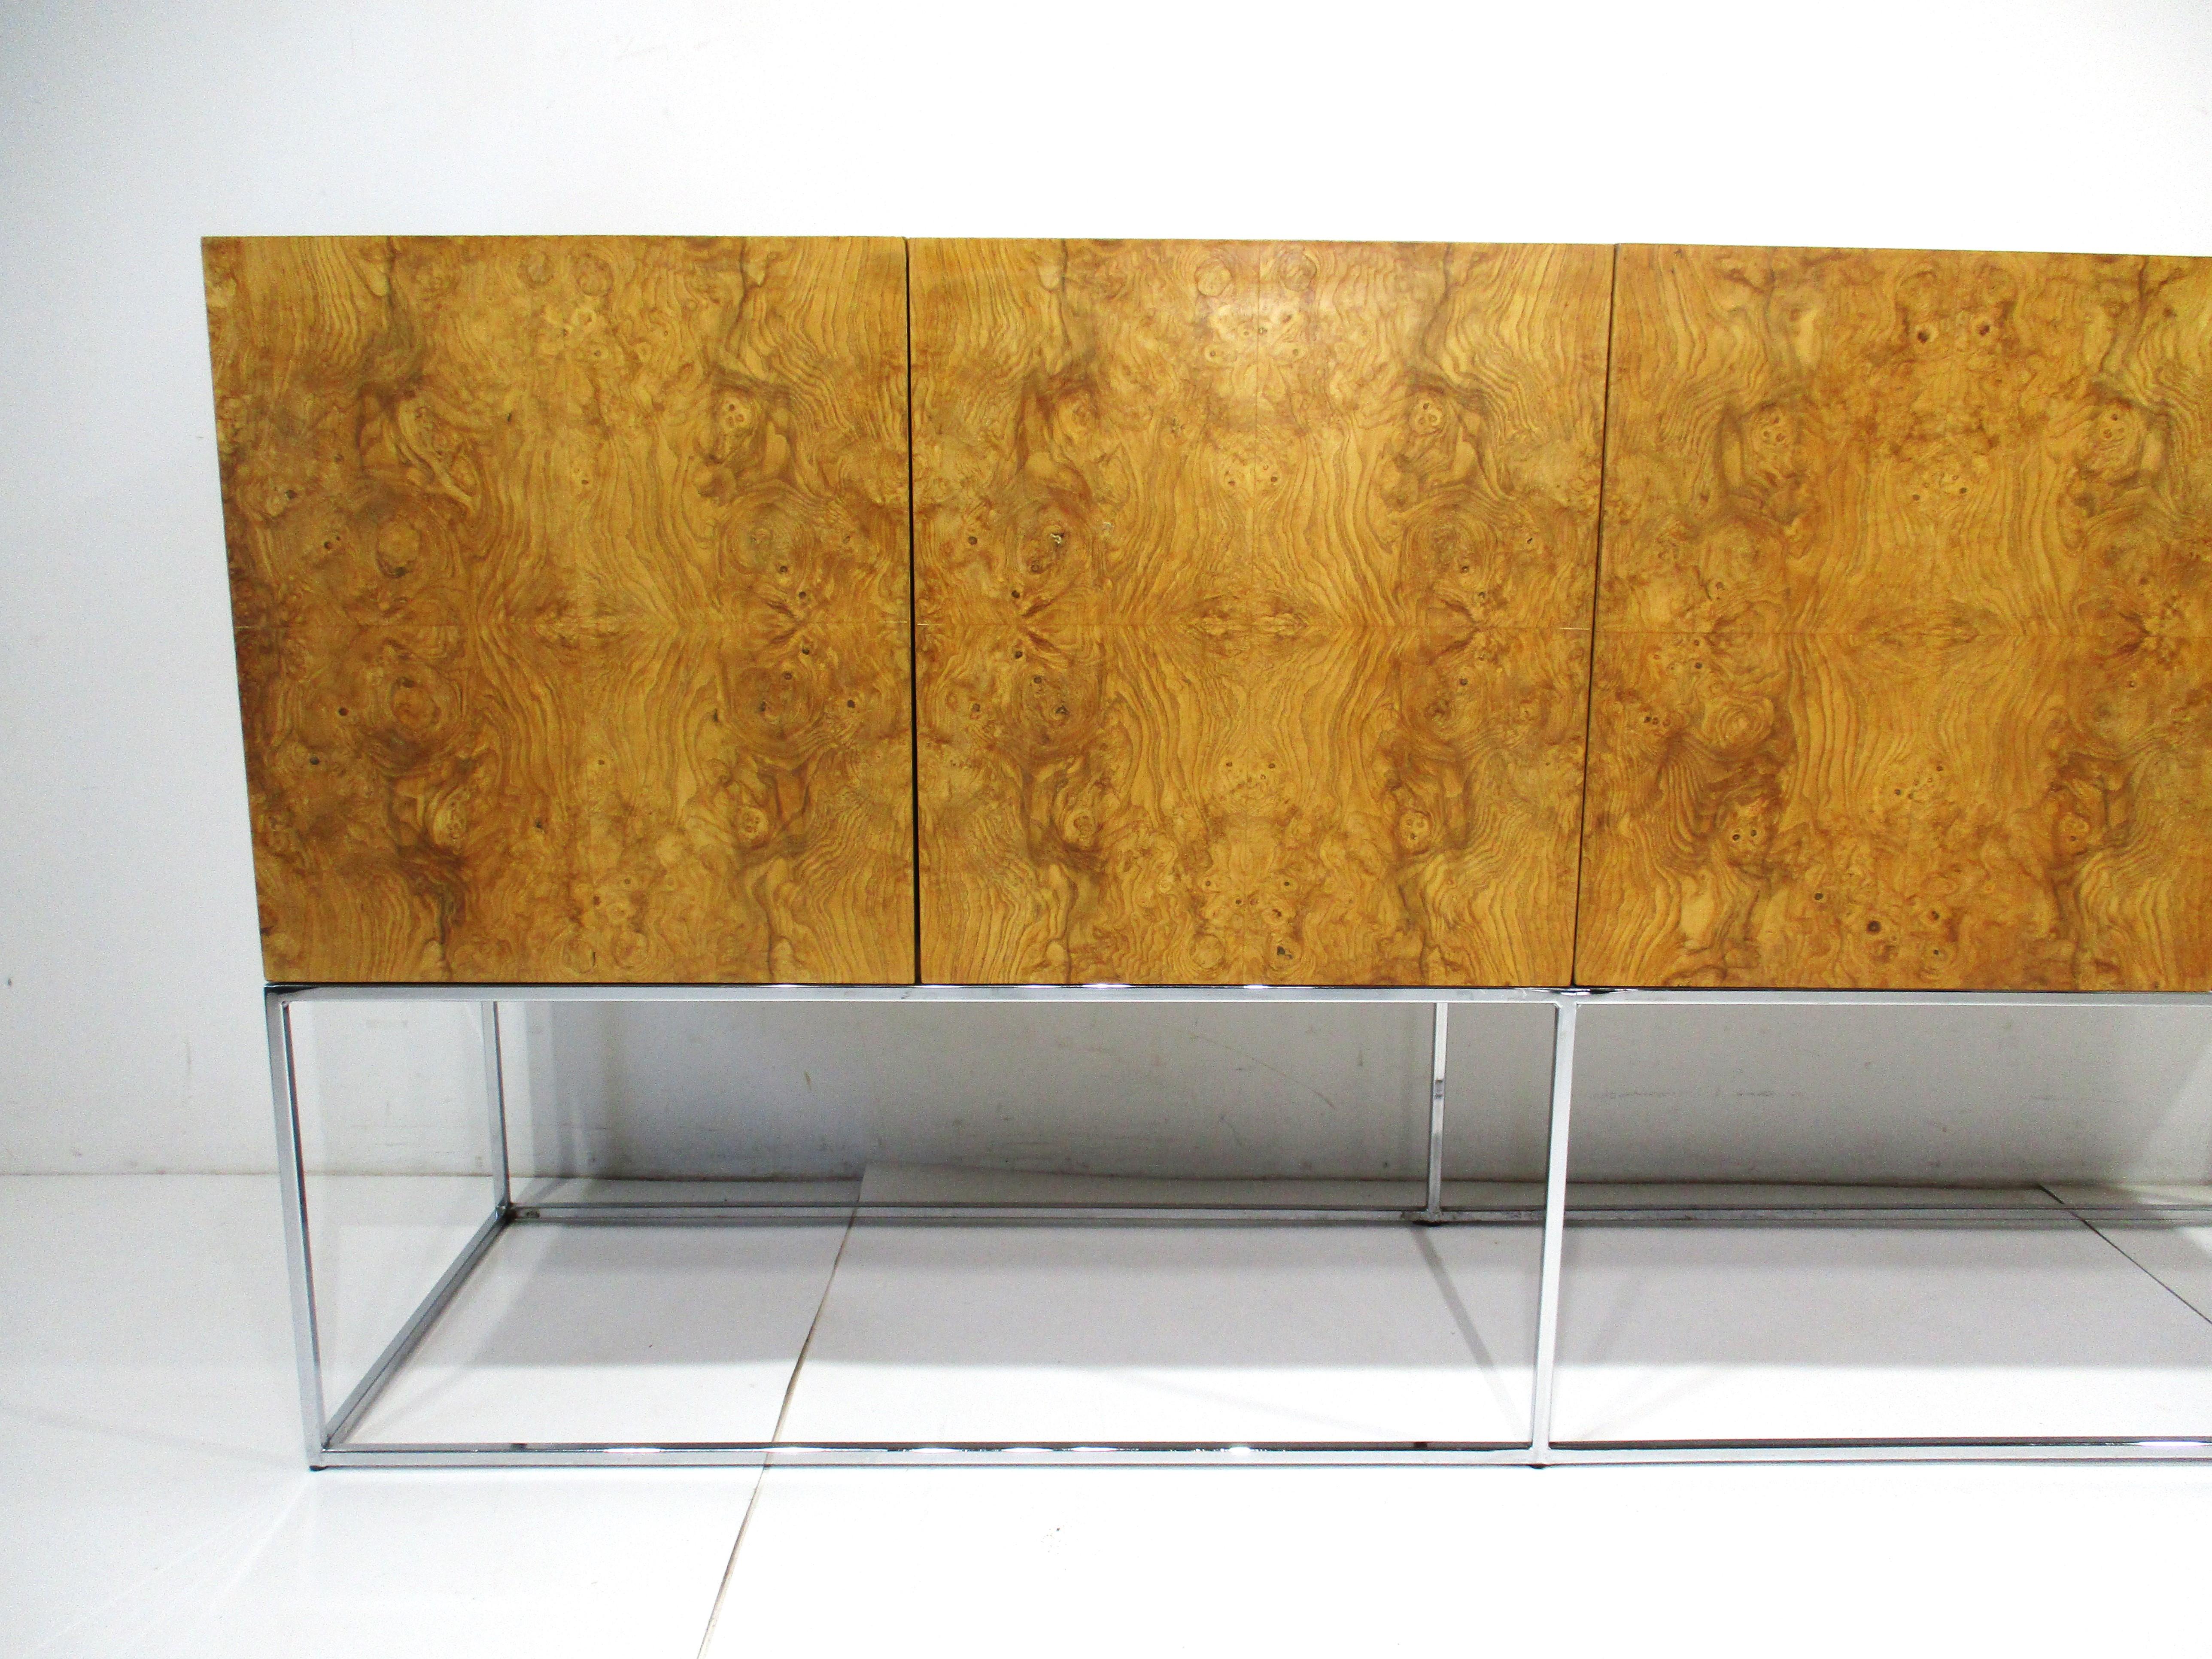 American Milo Baughman Olivewood Chrome Credenza or Server by Thayer Coggin For Sale